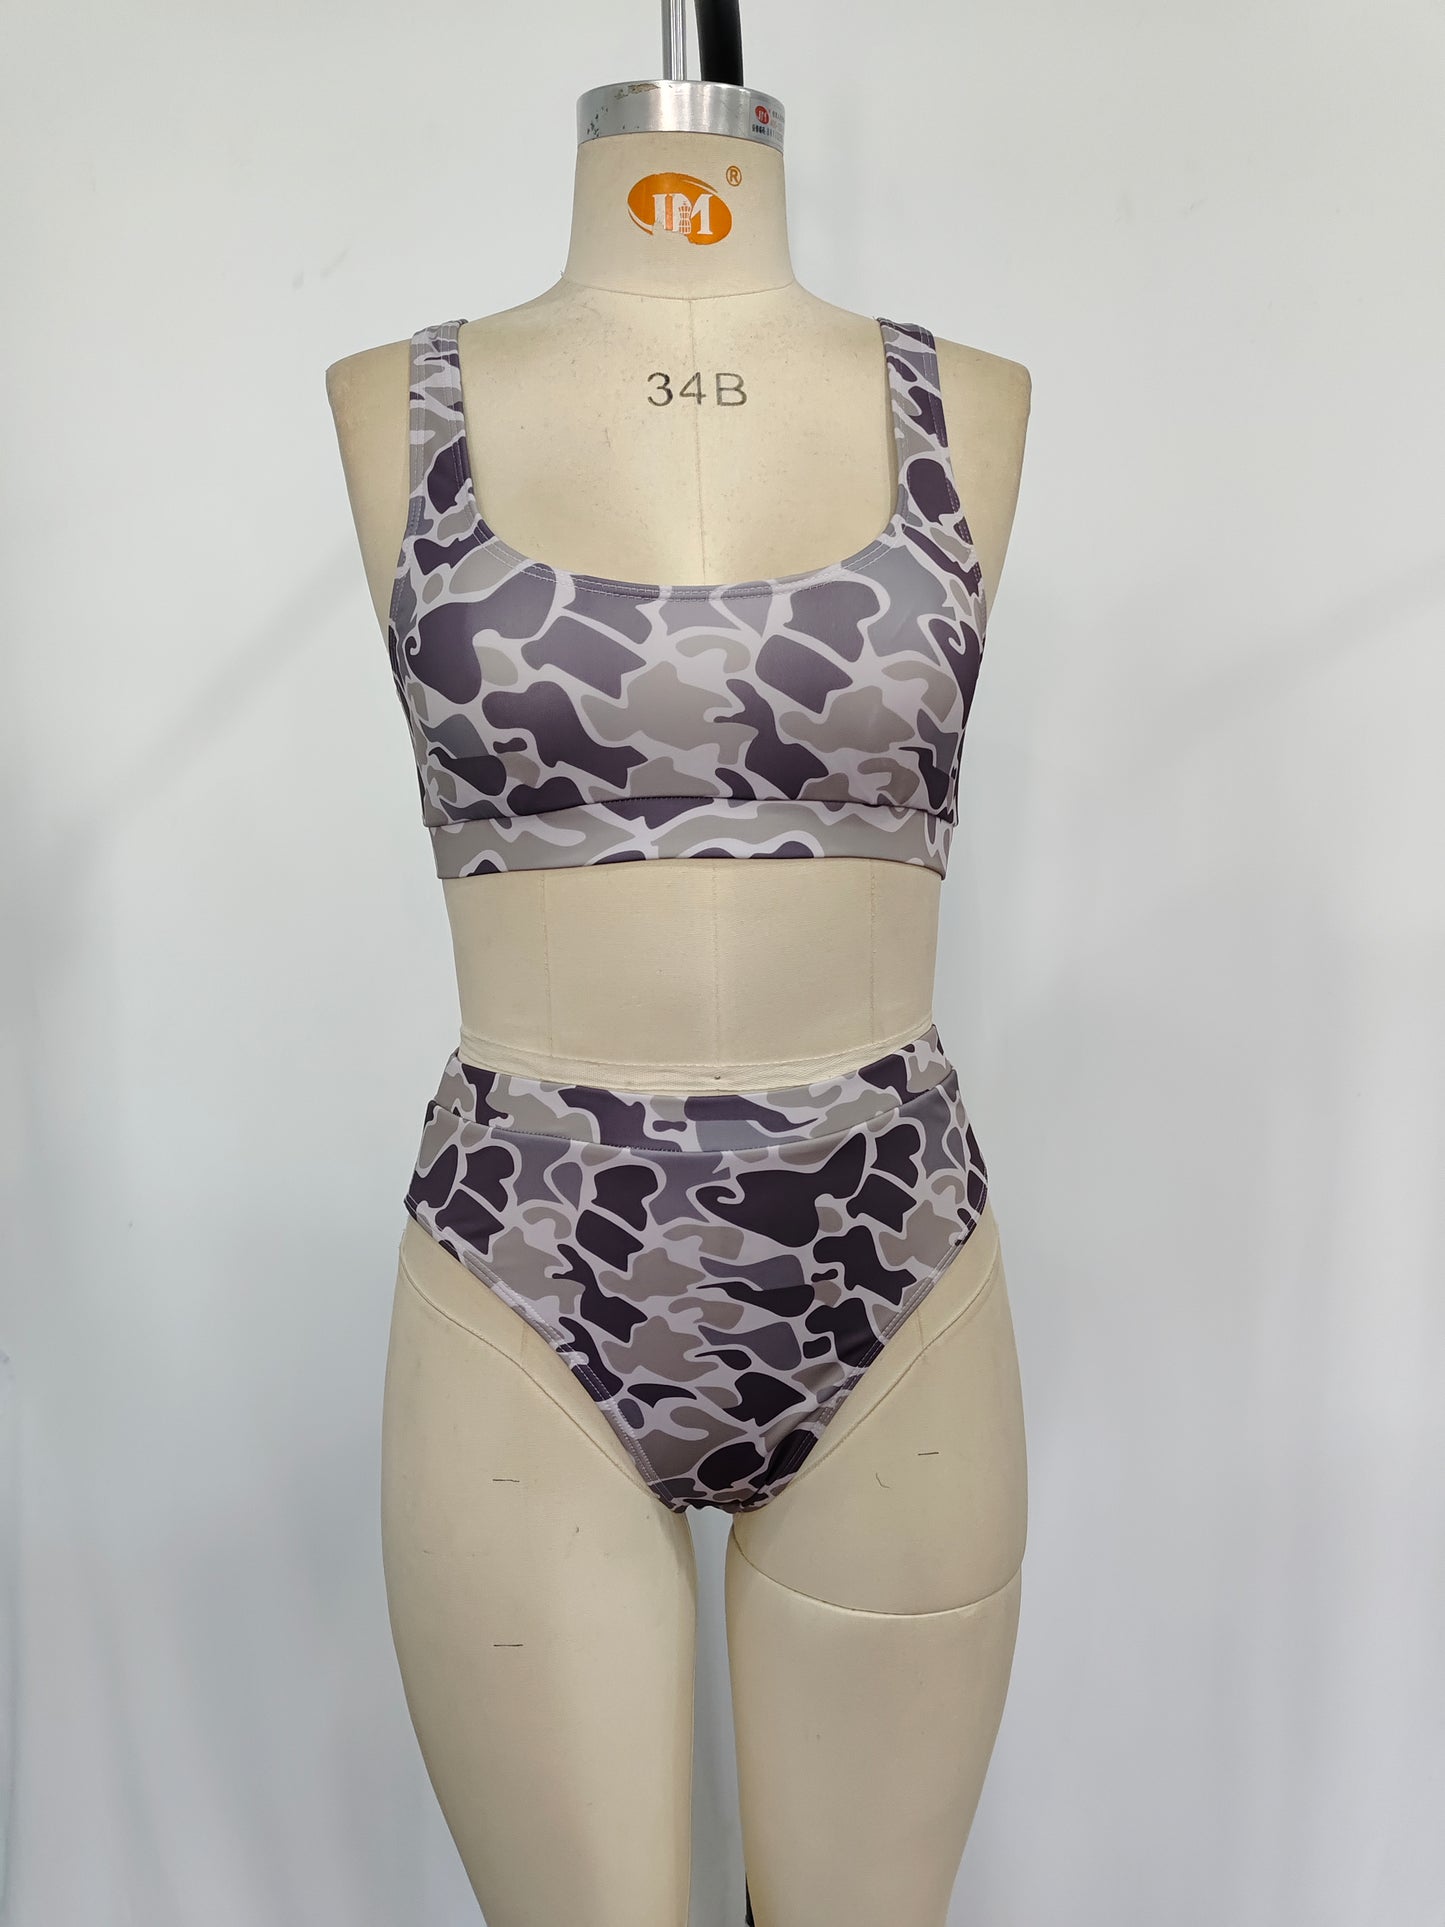 S0321 Adult Camo Print Woman 2 Pieces Swimsuits